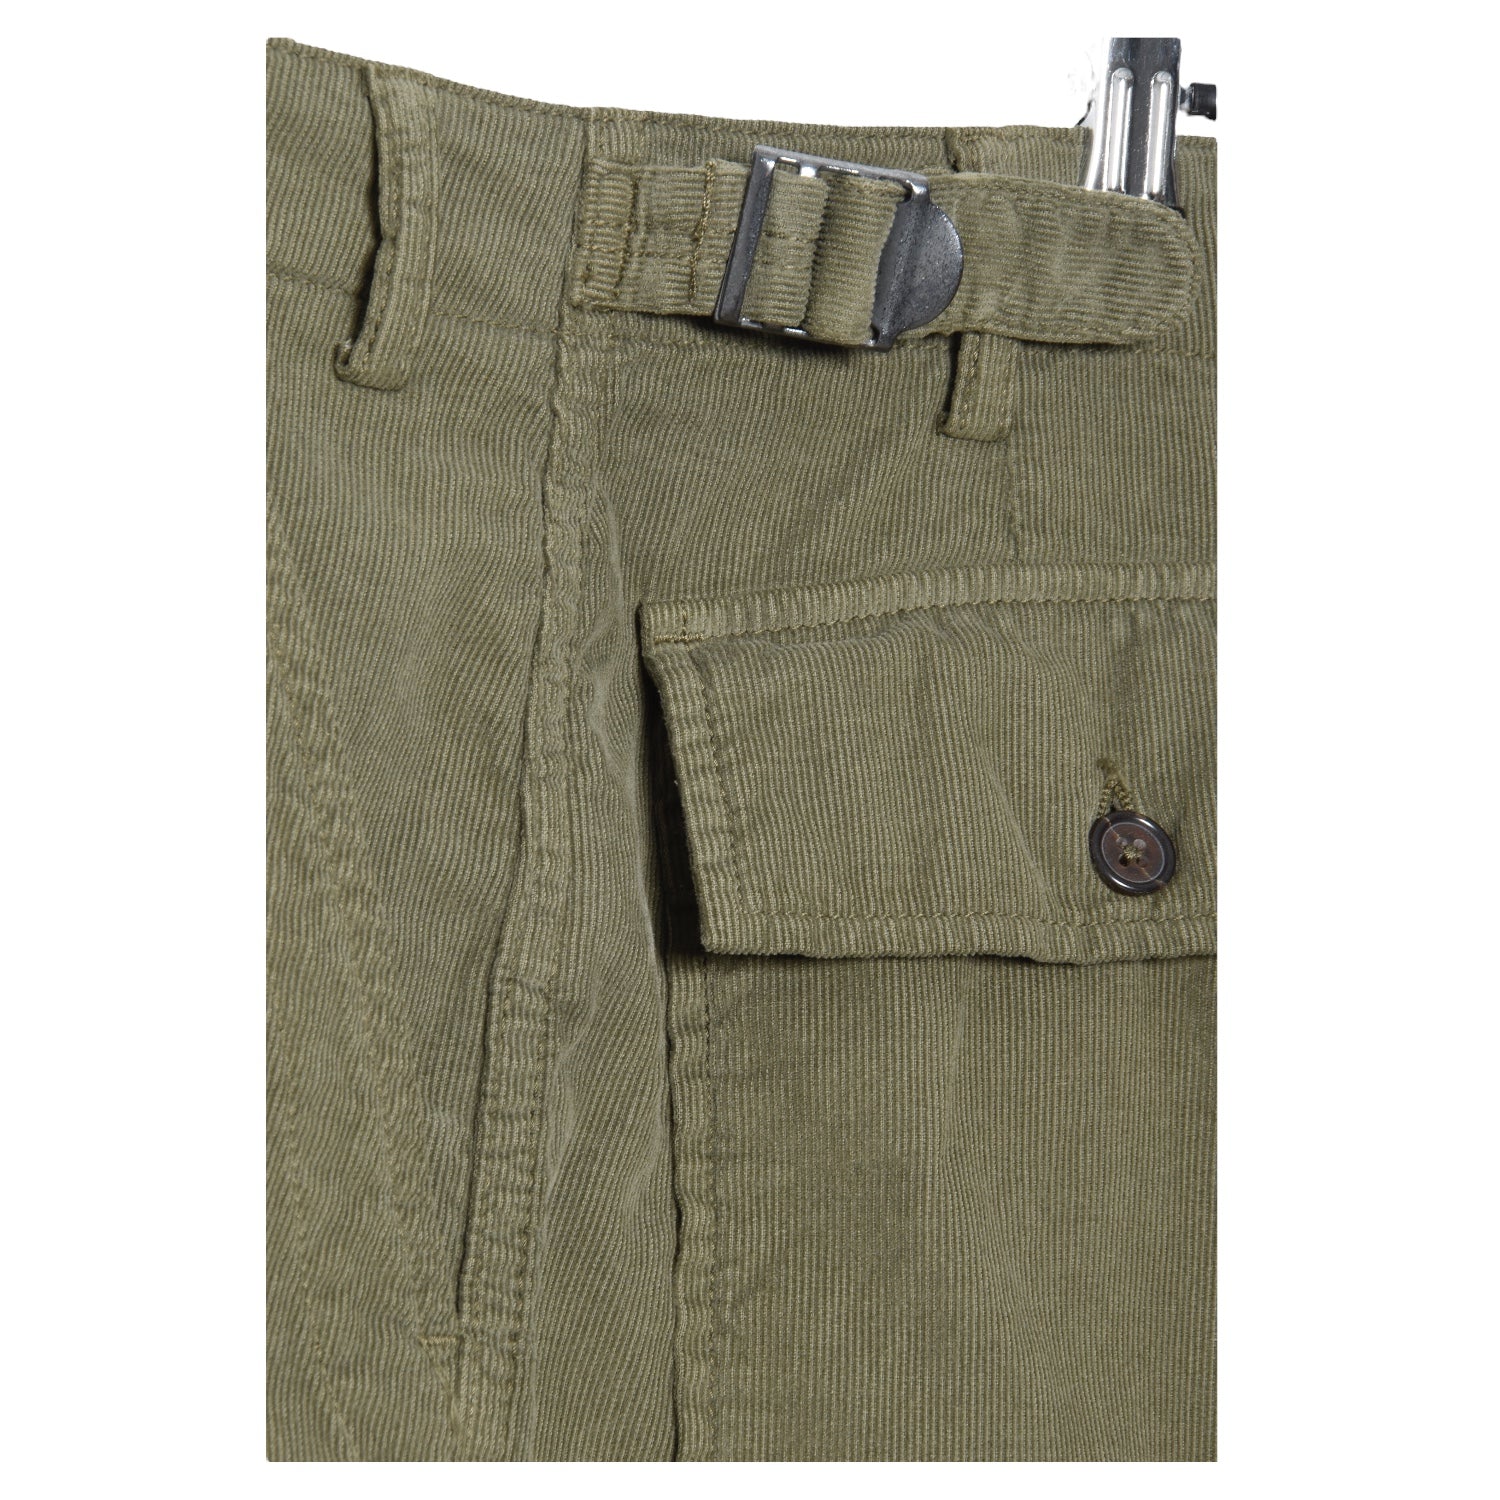 Universal Works Fatigue Short Summer Cord bright olive P26021